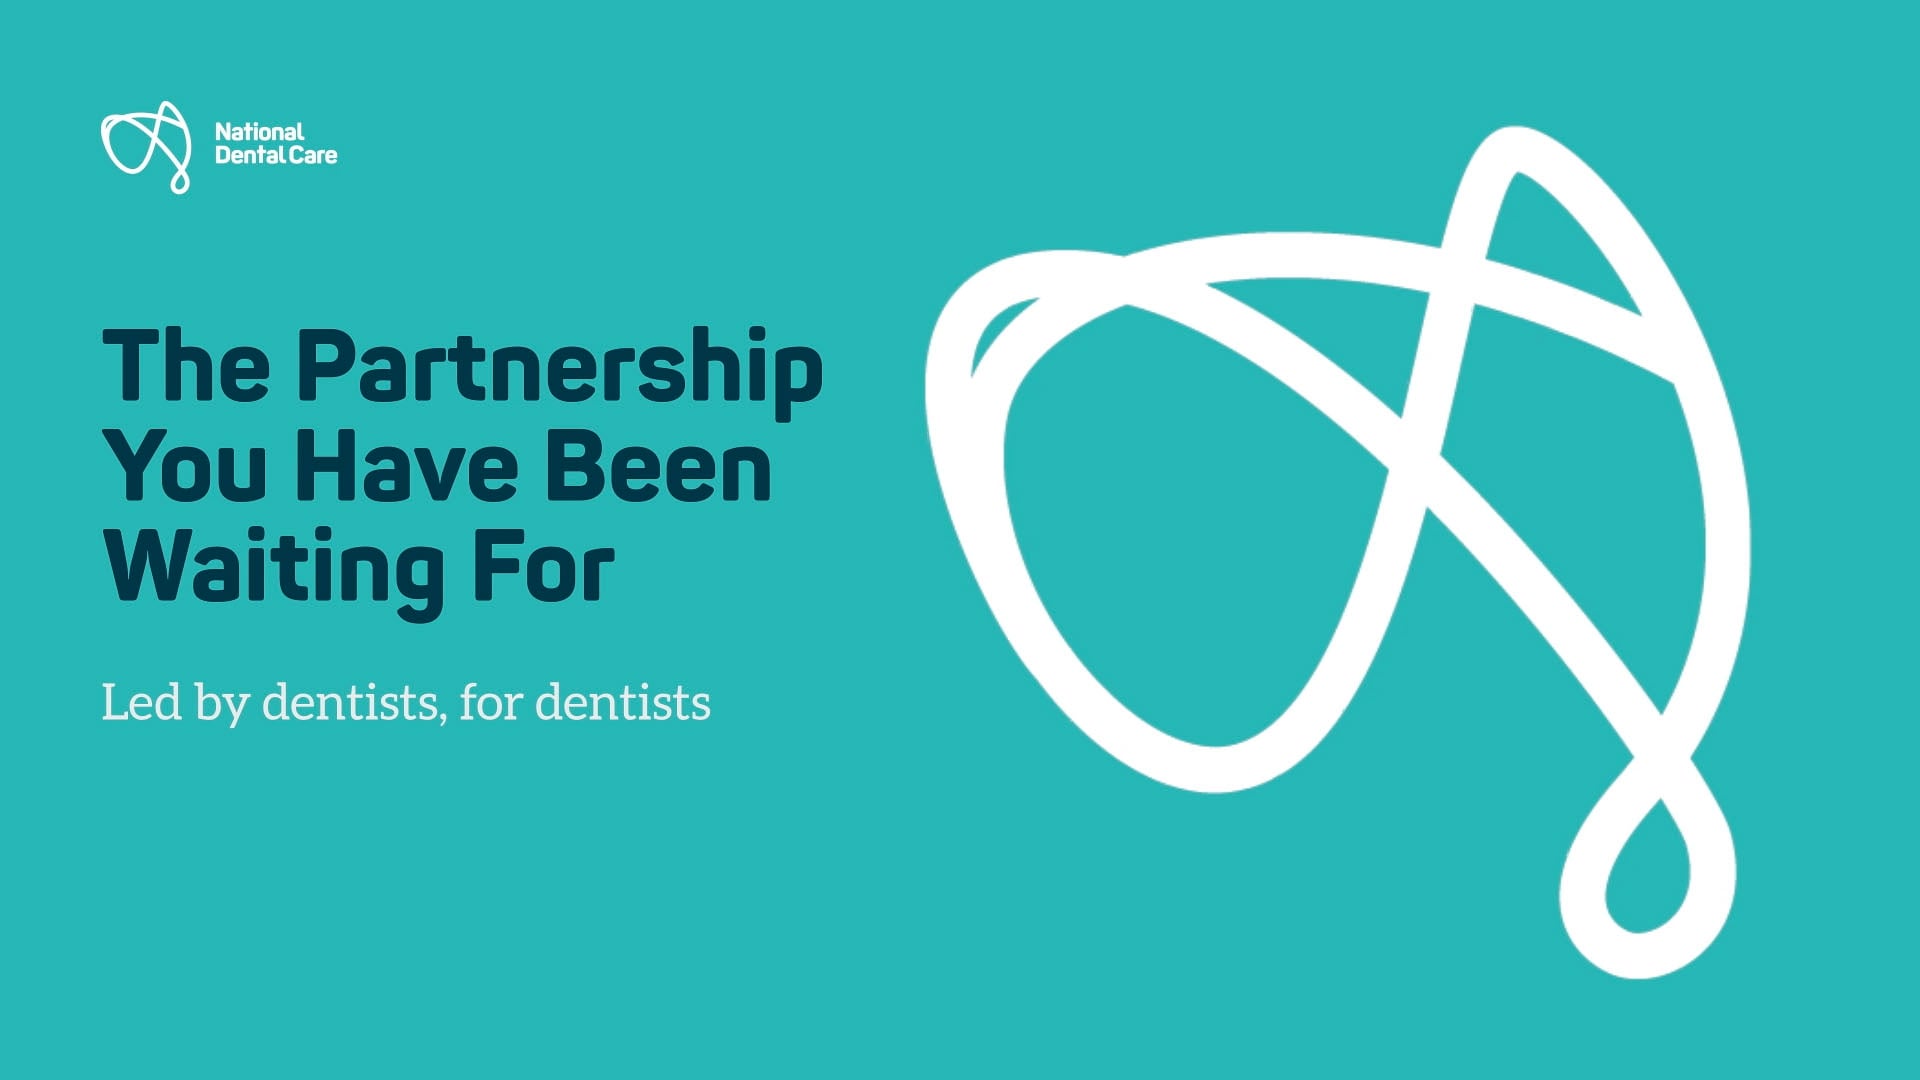 Partner with us at National Dental Care